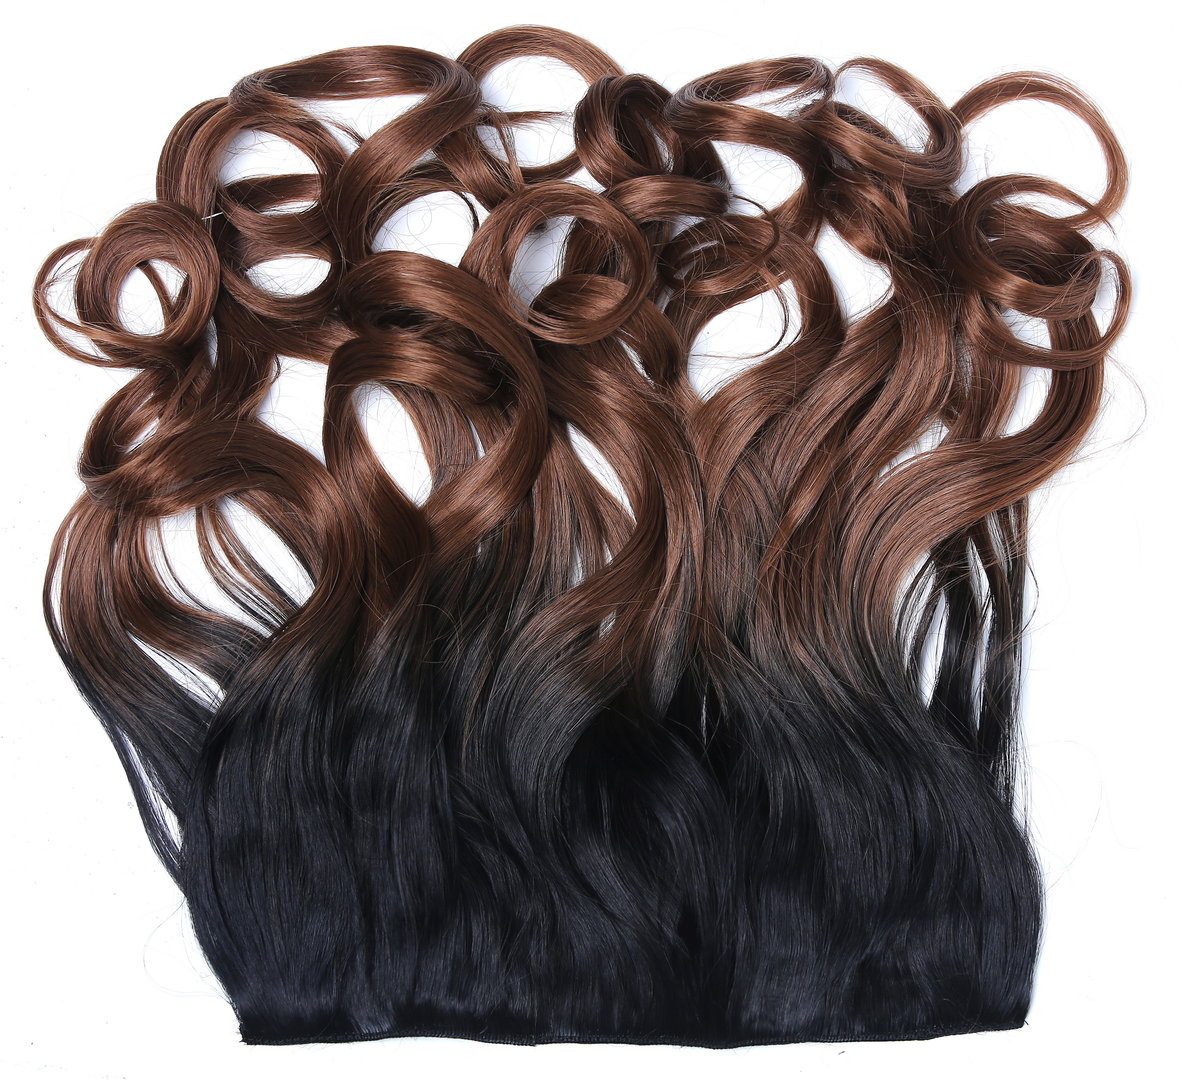 WIG ME UP - CMT-863-1BTT12 Clip-in hair extension 5 clips wide full back of  the head curled wavy ombre mix of black and gold brown 15 inches